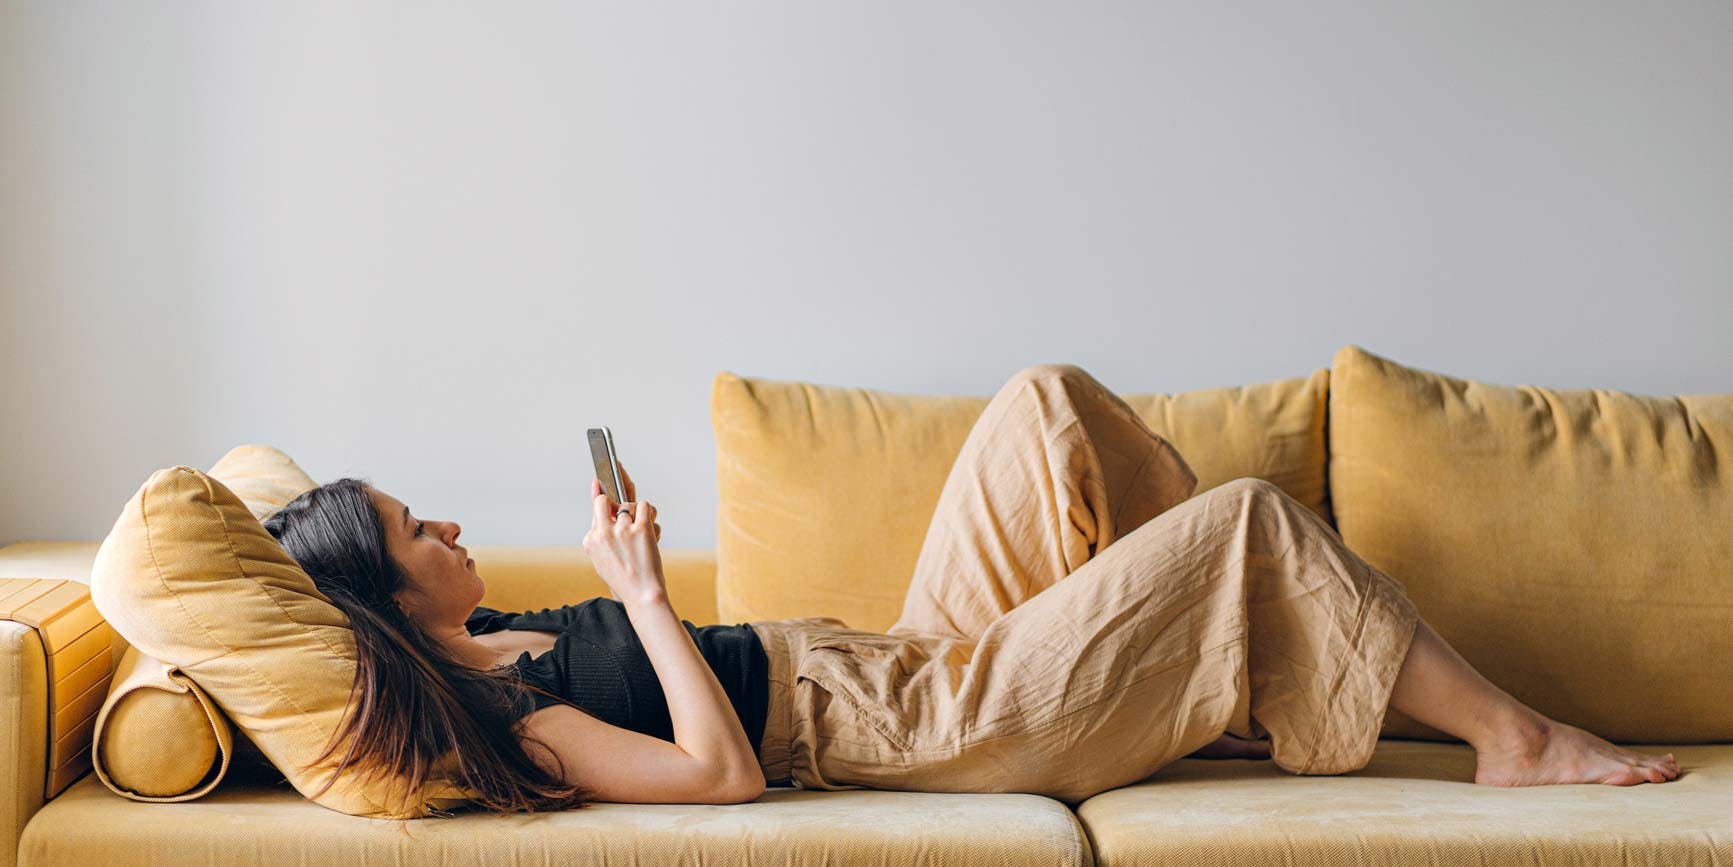 Woman lying down on yellow couch, interacting with her phone